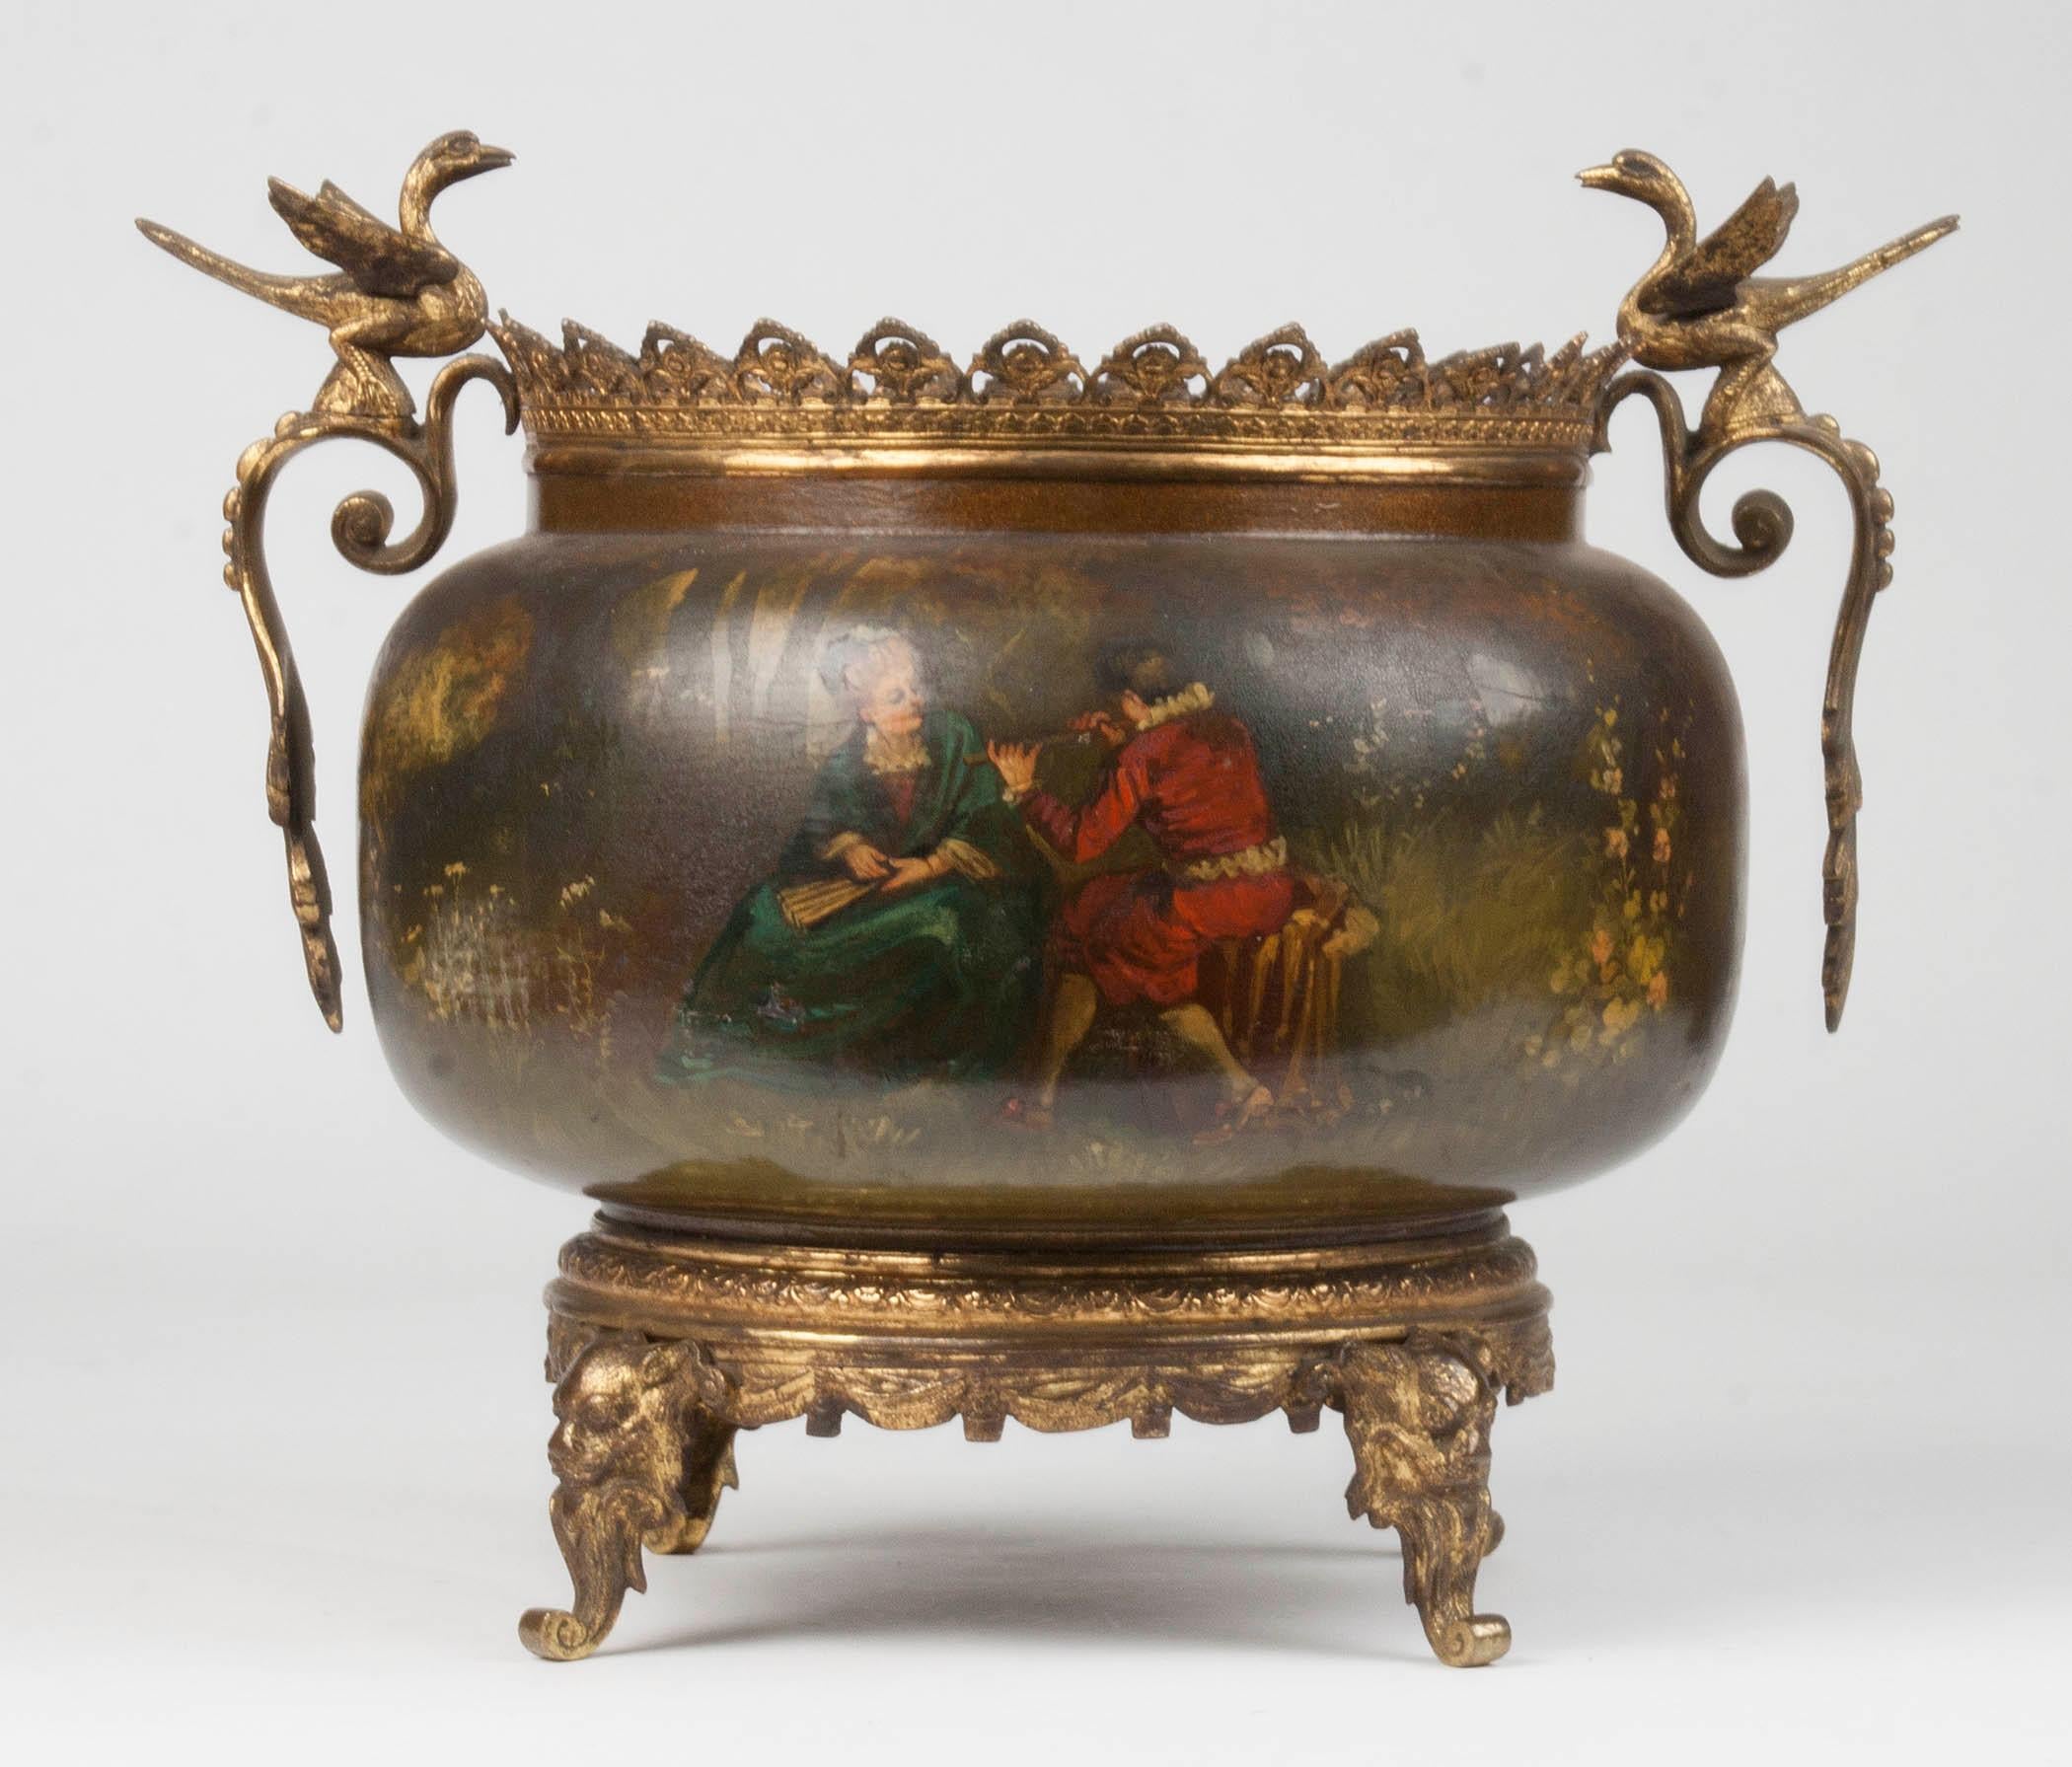 Beautiful flowerpot made of copper with a bronze base. The copper is painted with a romantic scene, this is also called 'Vernis Martin'. It is a painting technique that originated in France and is intended as an imitation of Japanese lacquerware.